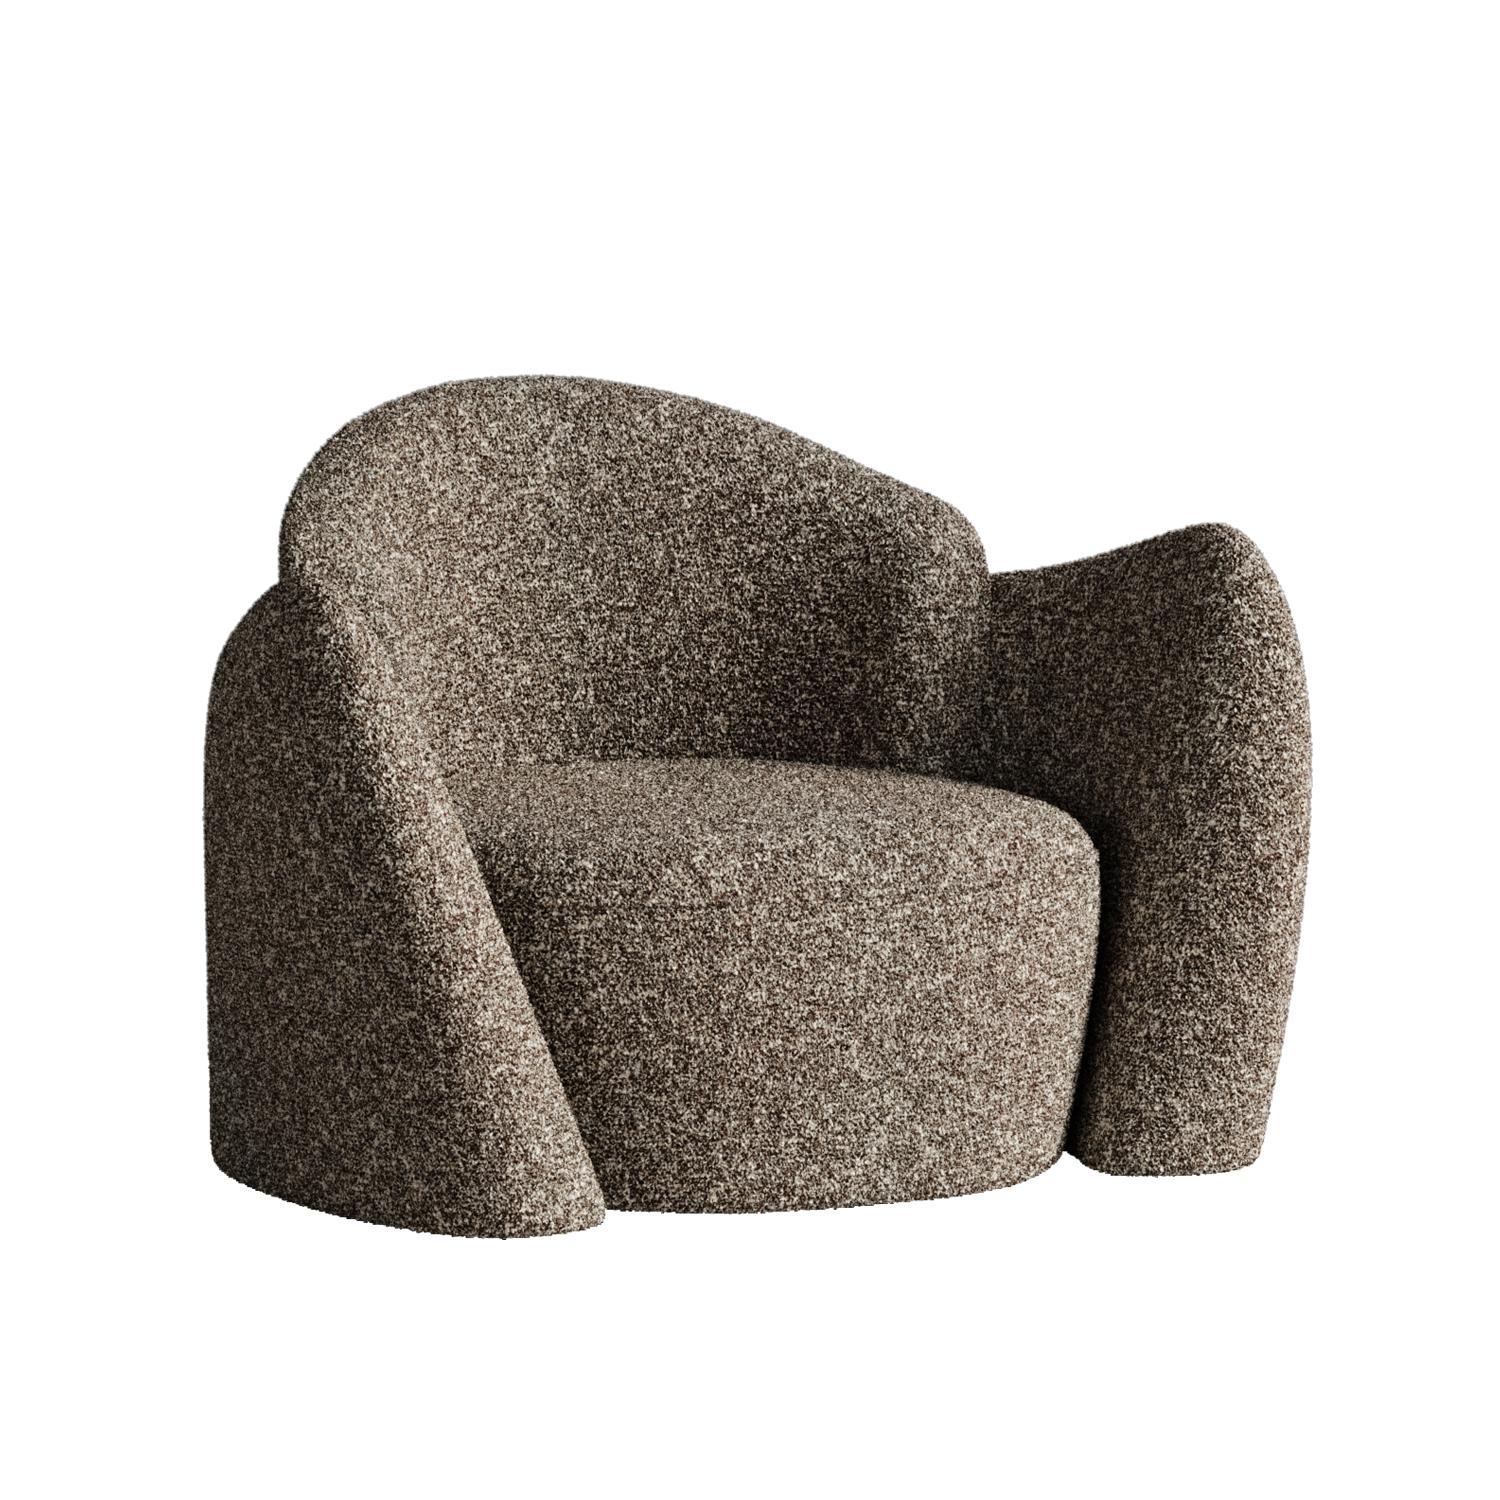 Chocolate Memory Chair by Plyus Design
Dimensions: D 90 x W 110 x H 80 cm
Materials:  Wood, HR foam, polyester wadding, fabric upholstery

“Memory” chair.
Collection 